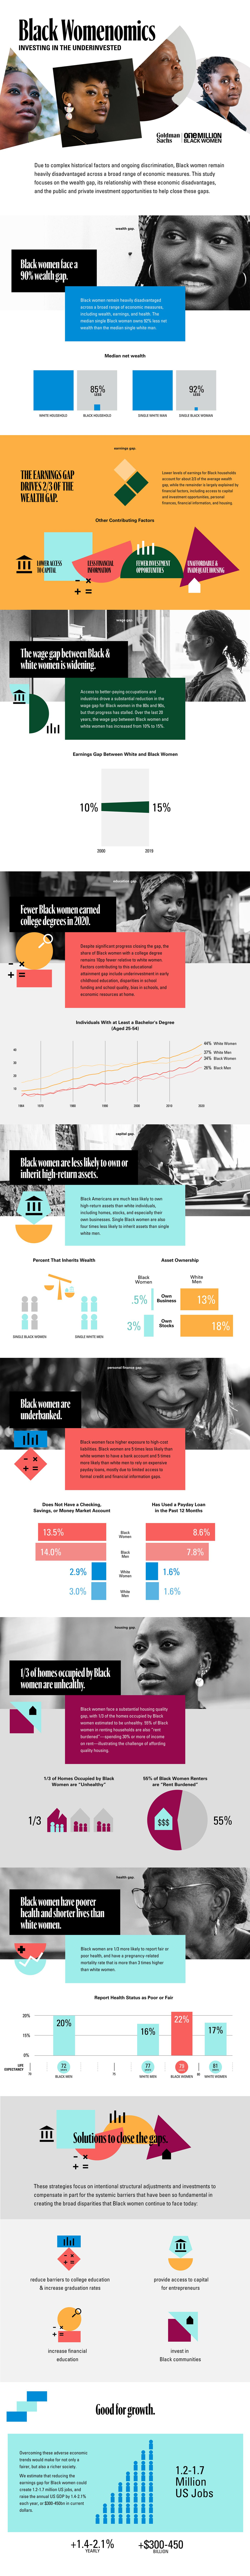 Black Womenomics: Investing in the Underinvested